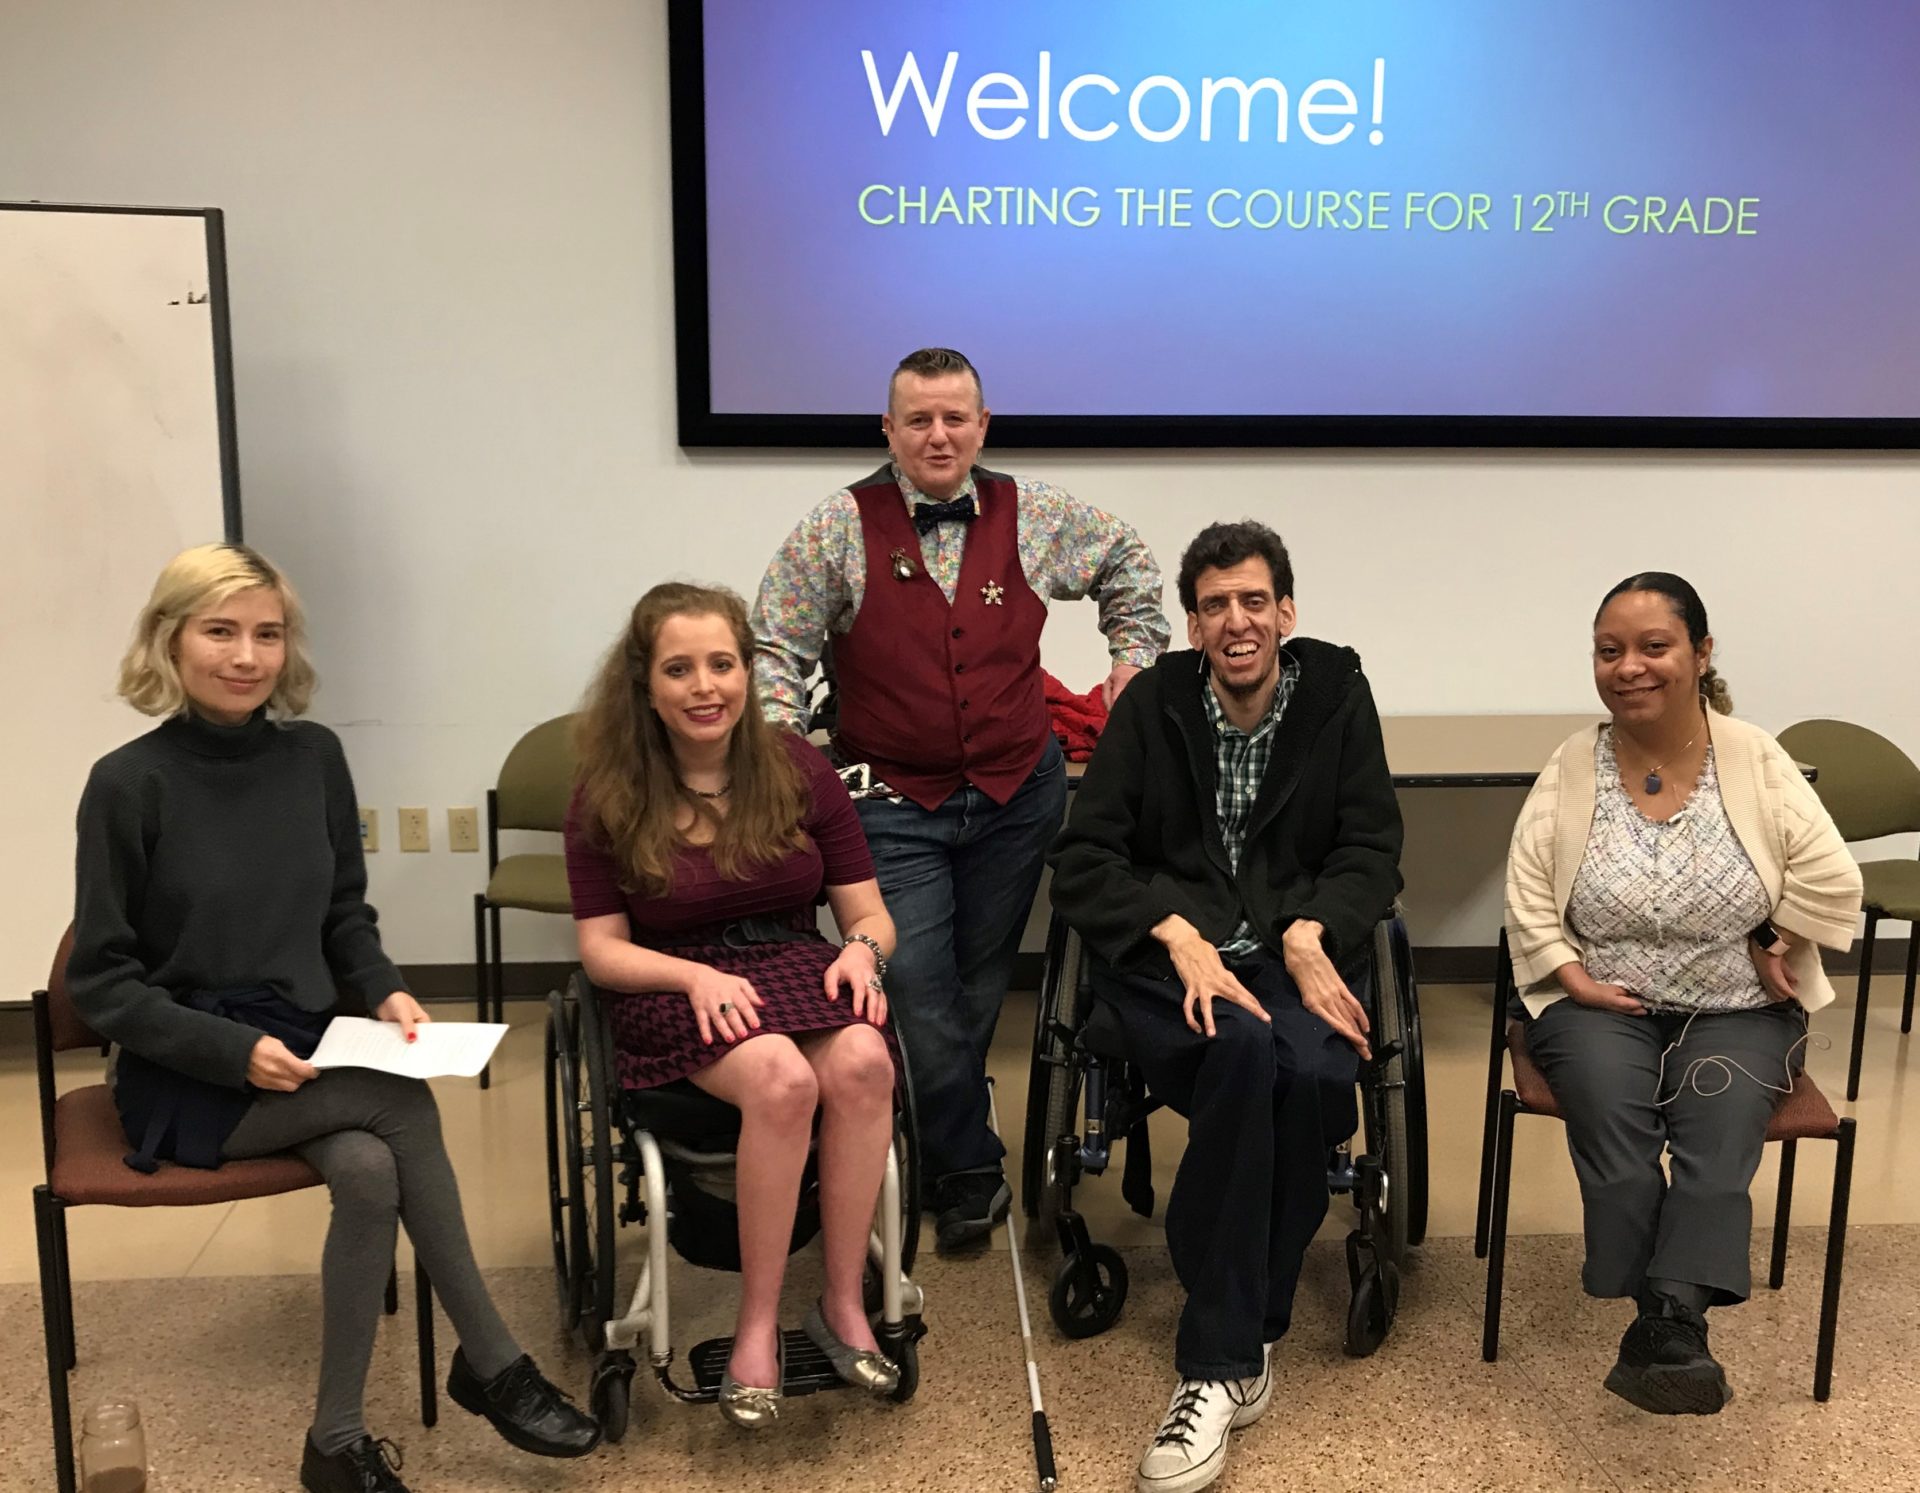 A photo of 5 adults with various disabilities smile in front of a projection screen.